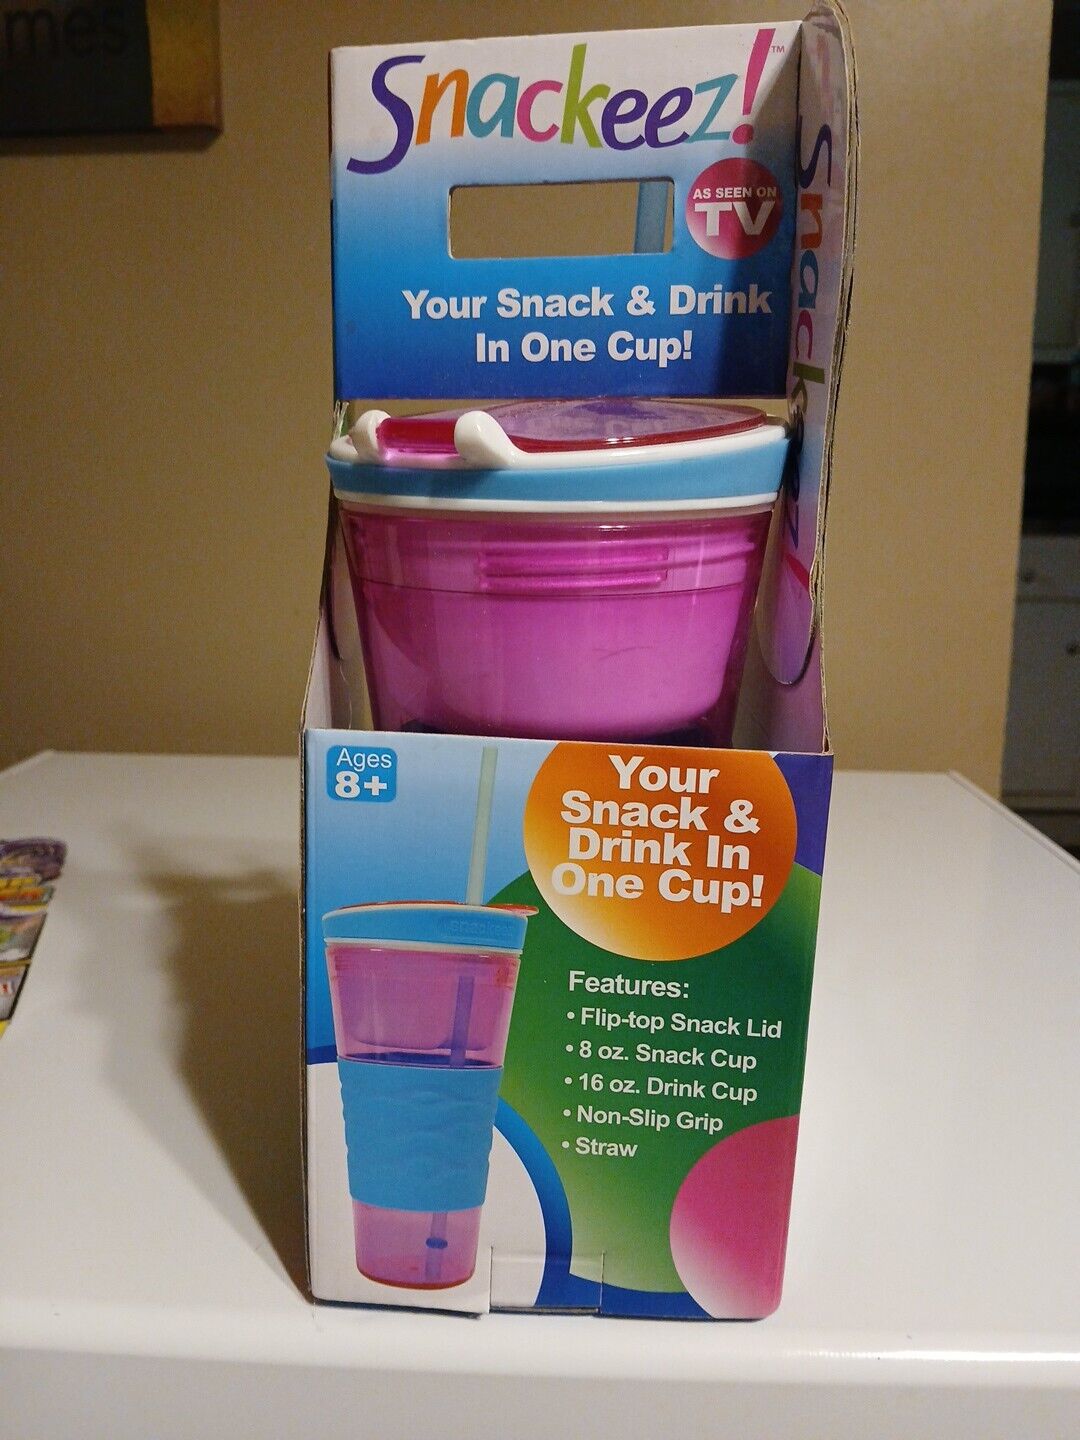 NOS Snackeez, as seen on TV, Snack & Drink Cup 2 in 1, turquoise, pink